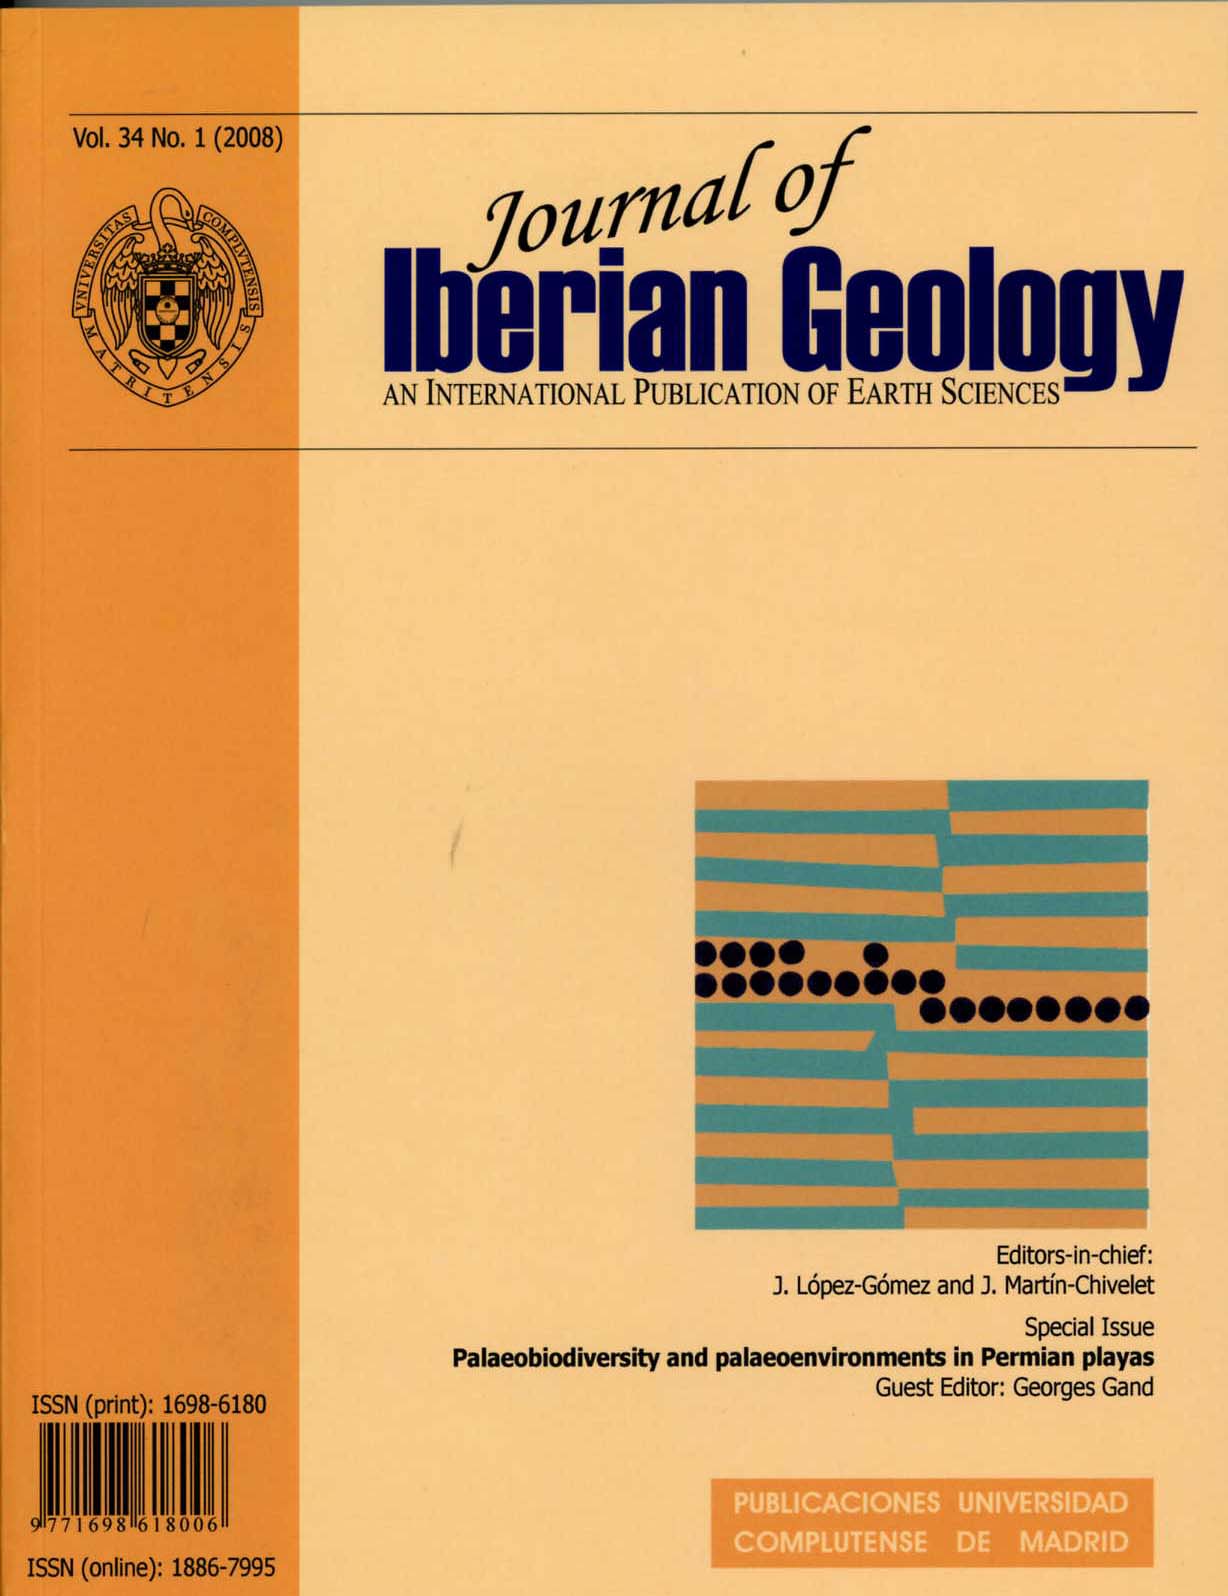 					Ver Vol. 34 Núm. 1 (2008): Palaeobiodiversity and palaeoenvironments in Permian playas
				